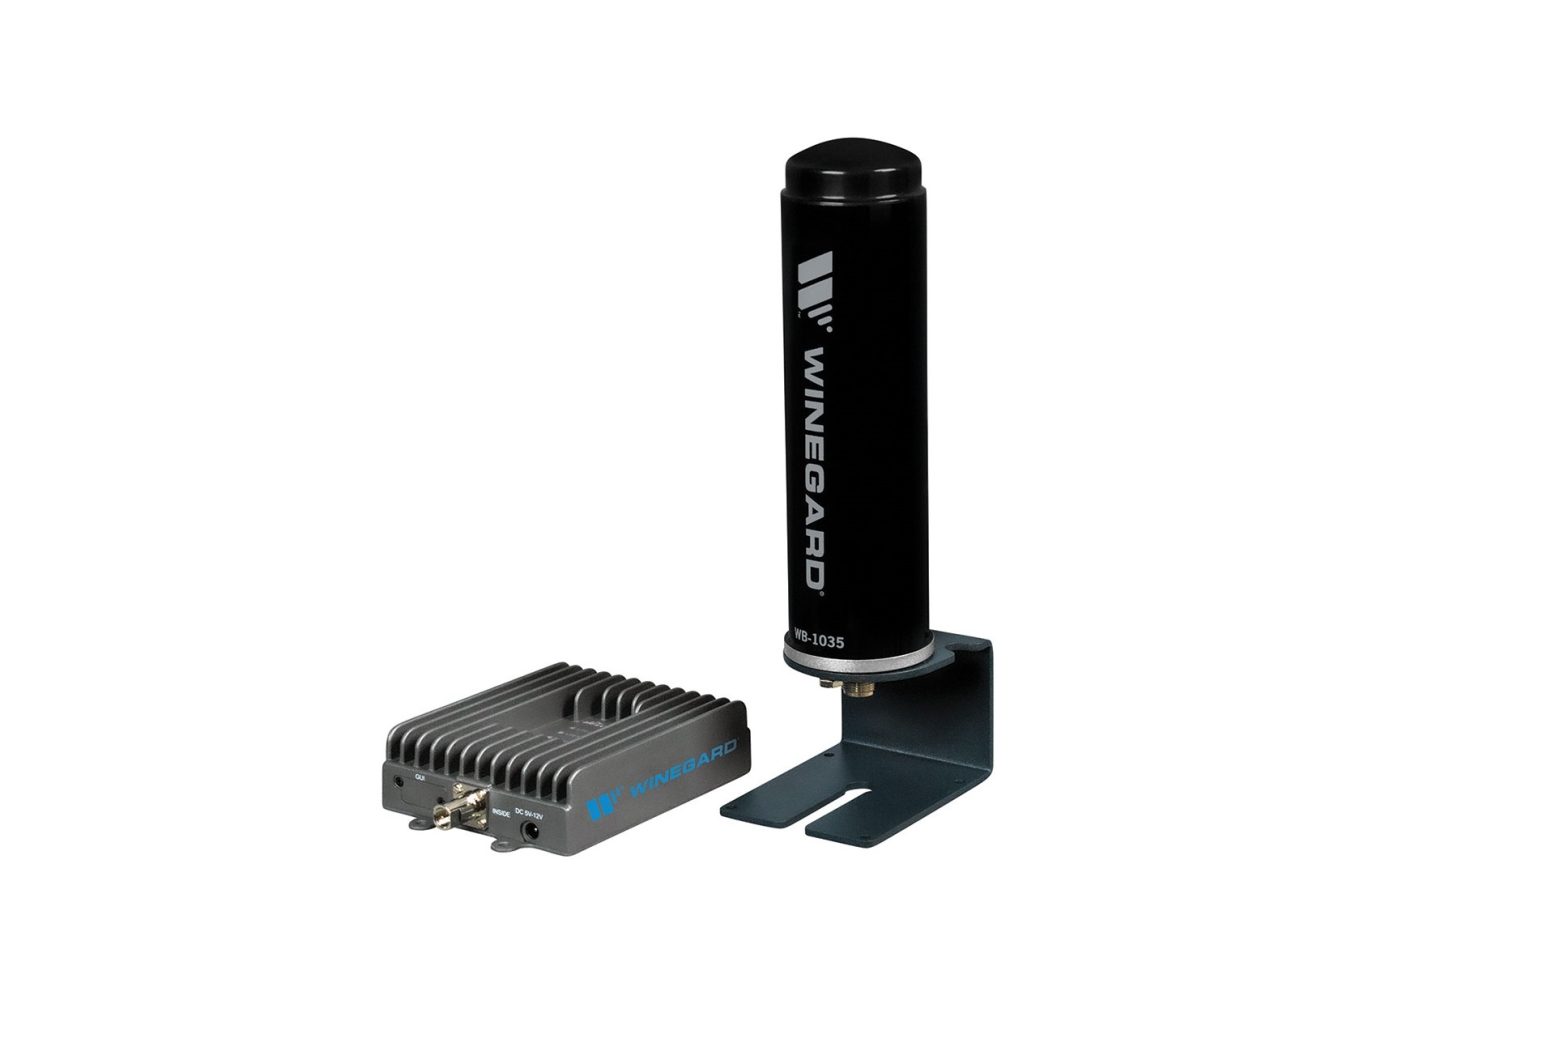 WINEGARD WB-1035 RangePro Cellular Booster for RVs User Guide